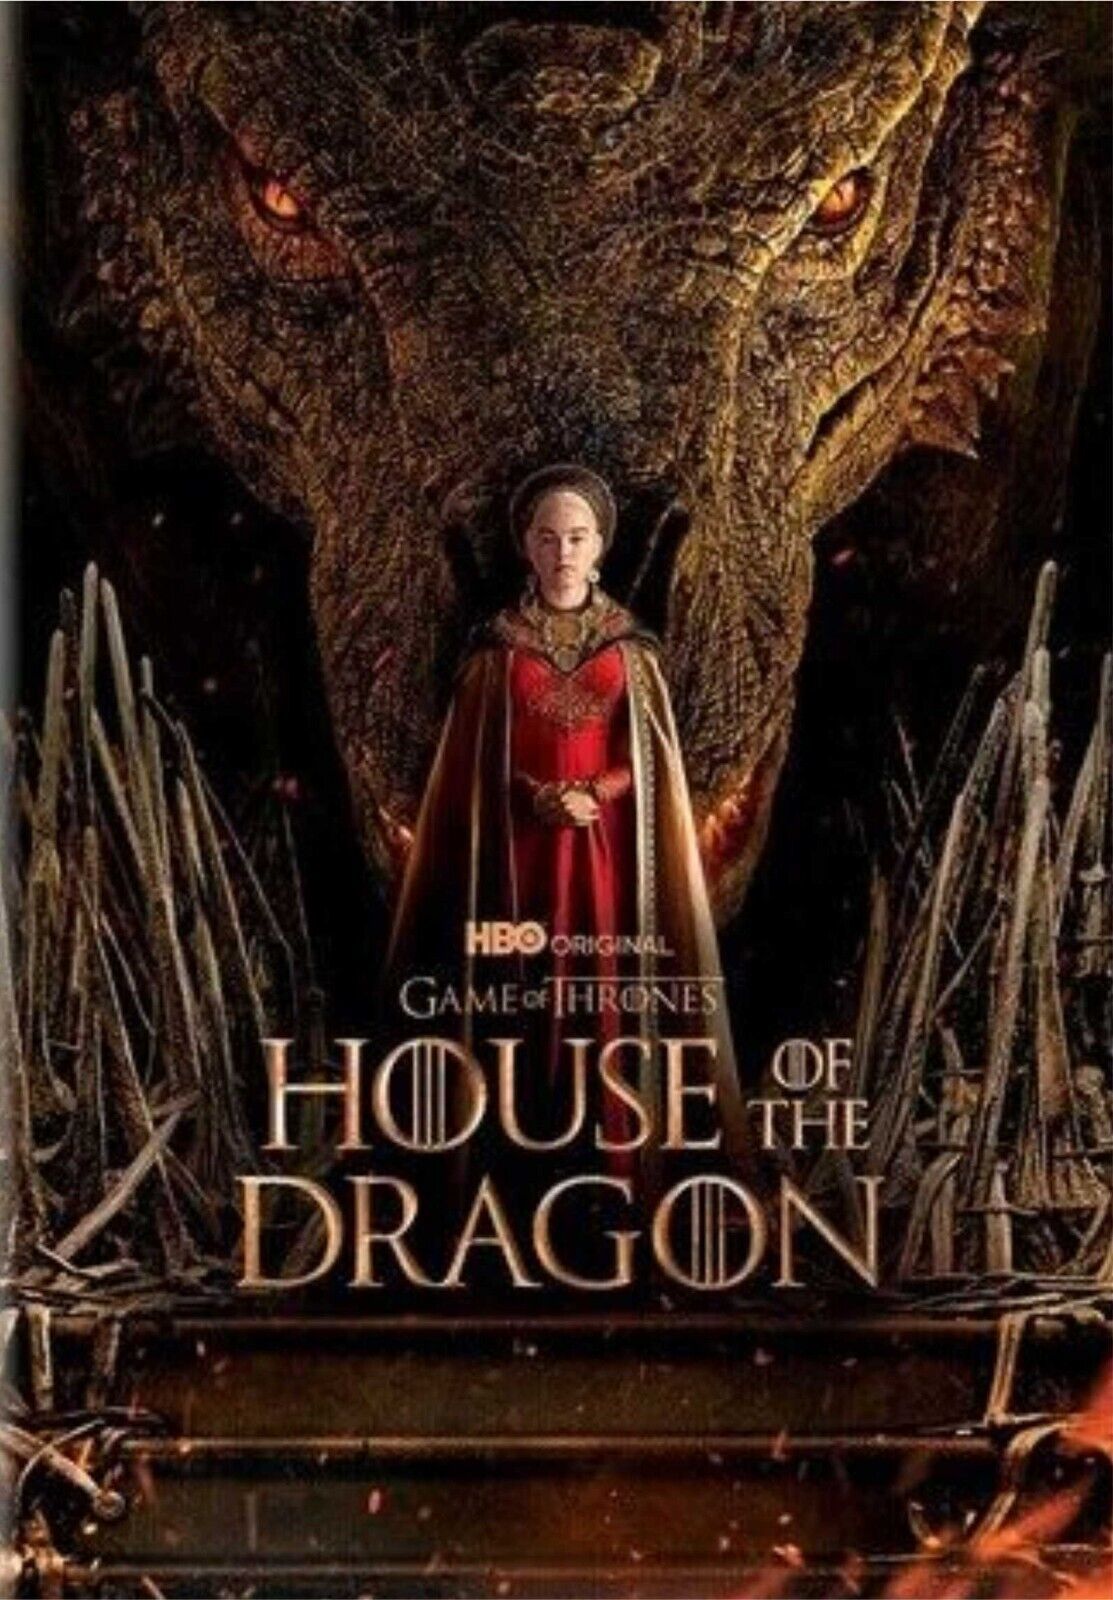 Game of Thrones HOUSE OF THE DRAGON the Complete Season 1 - DVD TV Series - NEW! - $12.59